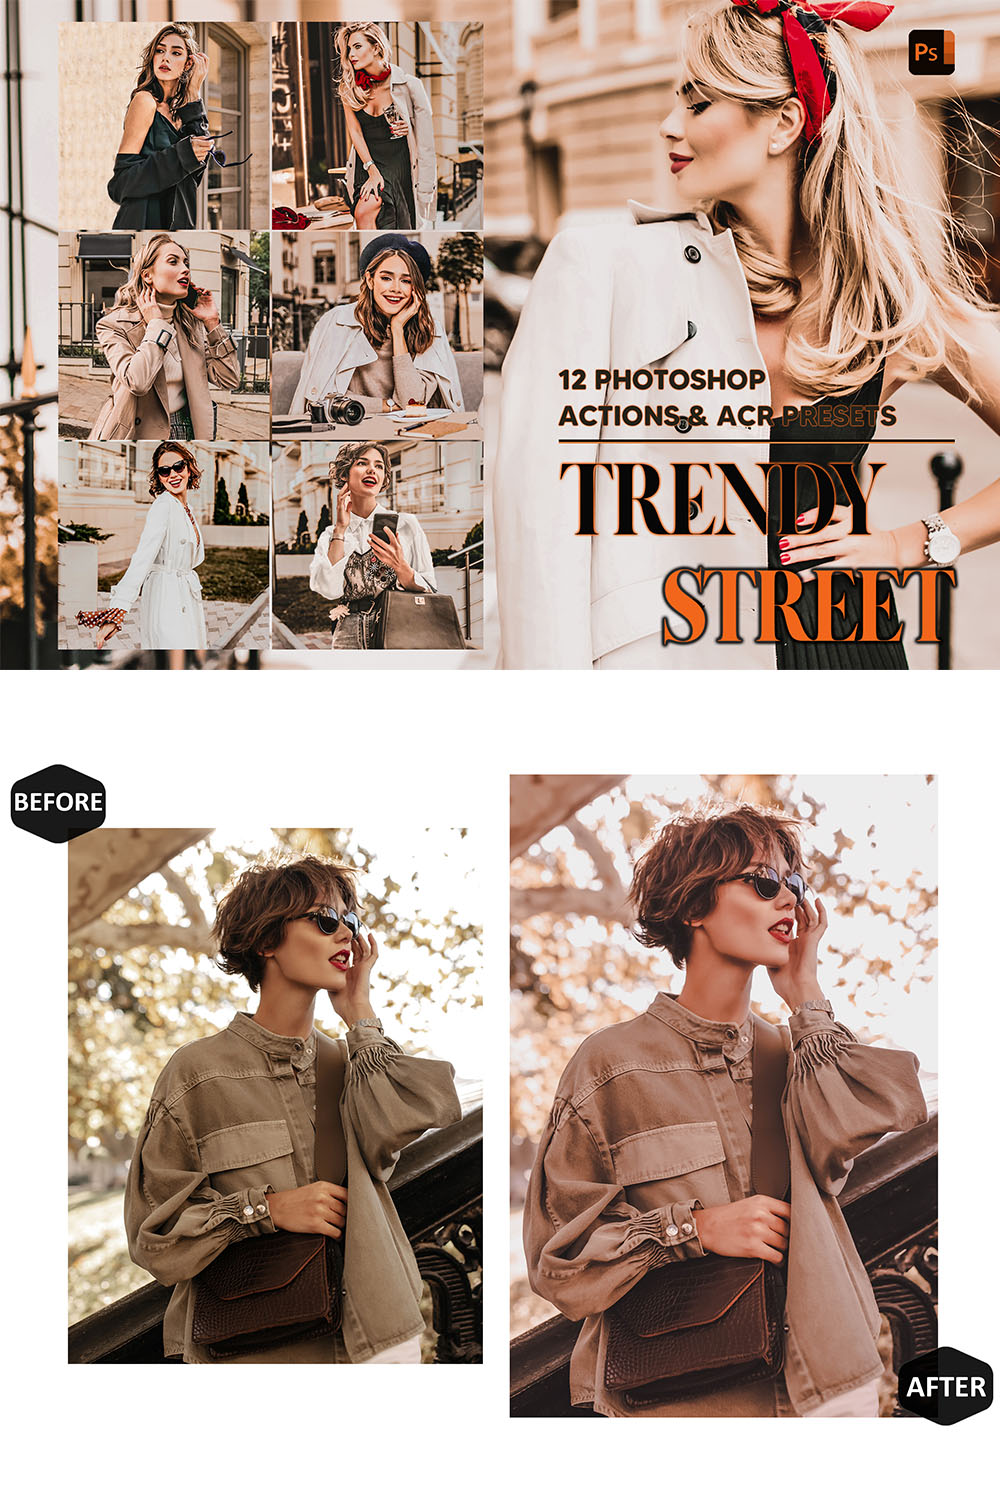 12 Photoshop Actions, Trendy Street Ps Action, Model Style ACR Preset, Matte Ps Filter, Atn Portrait And Lifestyle Theme Instagram Blogger pinterest preview image.